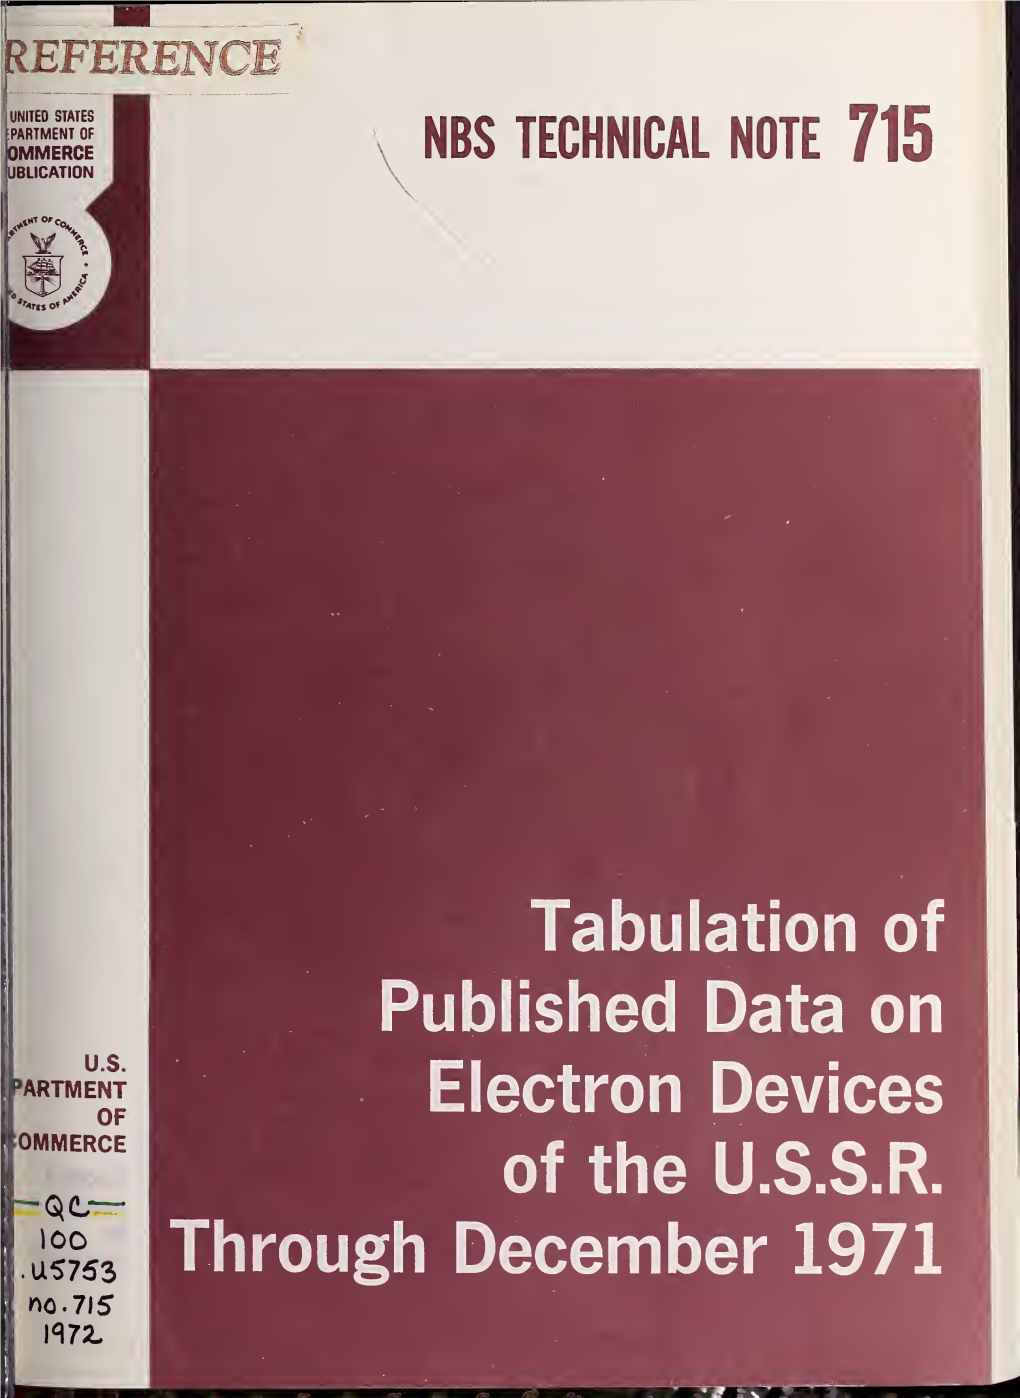 Tabulation of Published Data on Electron Devices of the U.S.S.R. Through December 1971